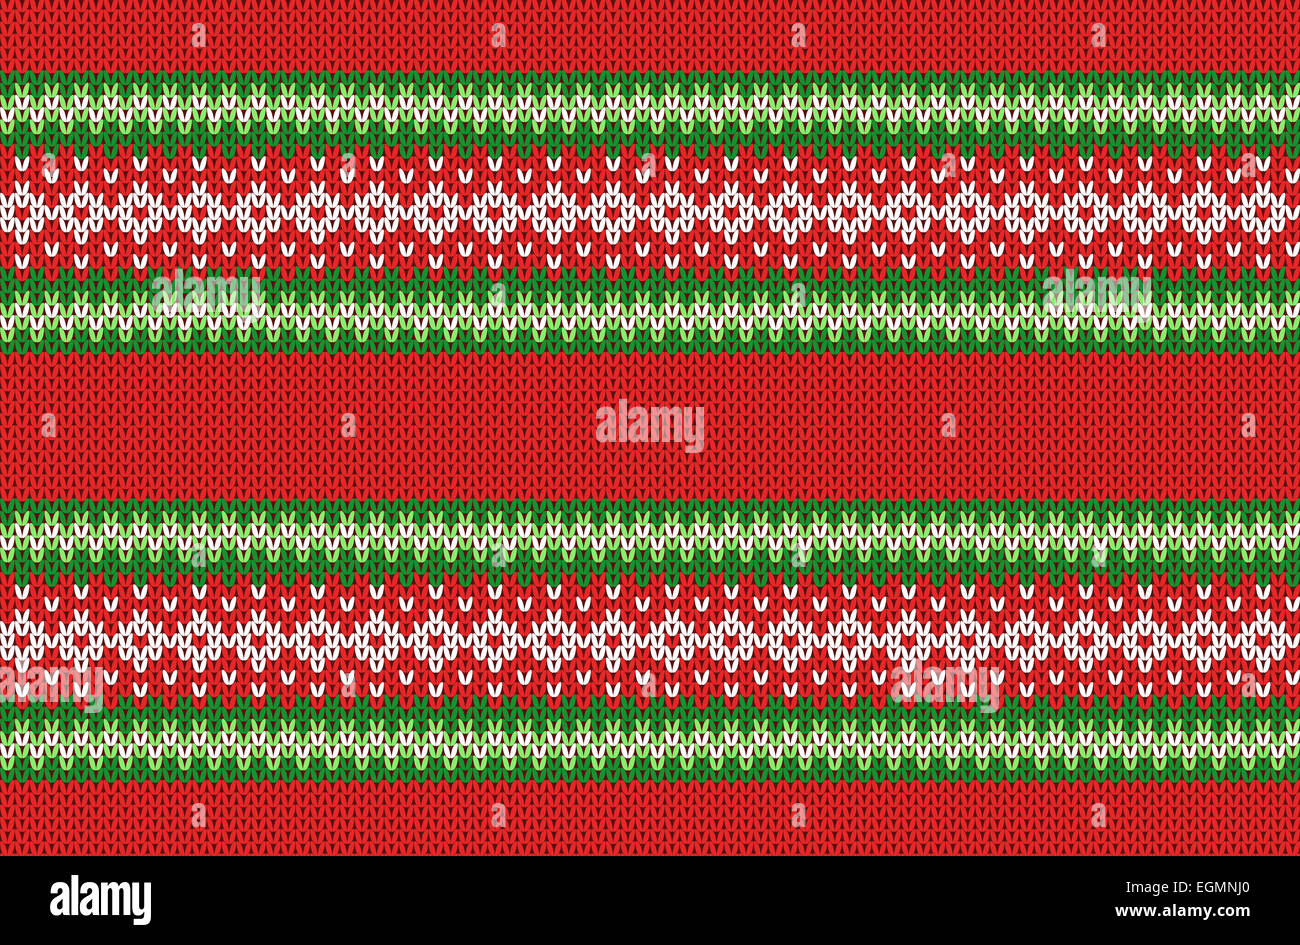 Winter Geometric Ornament Seamless Pattern Background in Red, Green and White from Knitted Fabric with Copy Space for Merry Christmas or Happy New Year Stock Photo